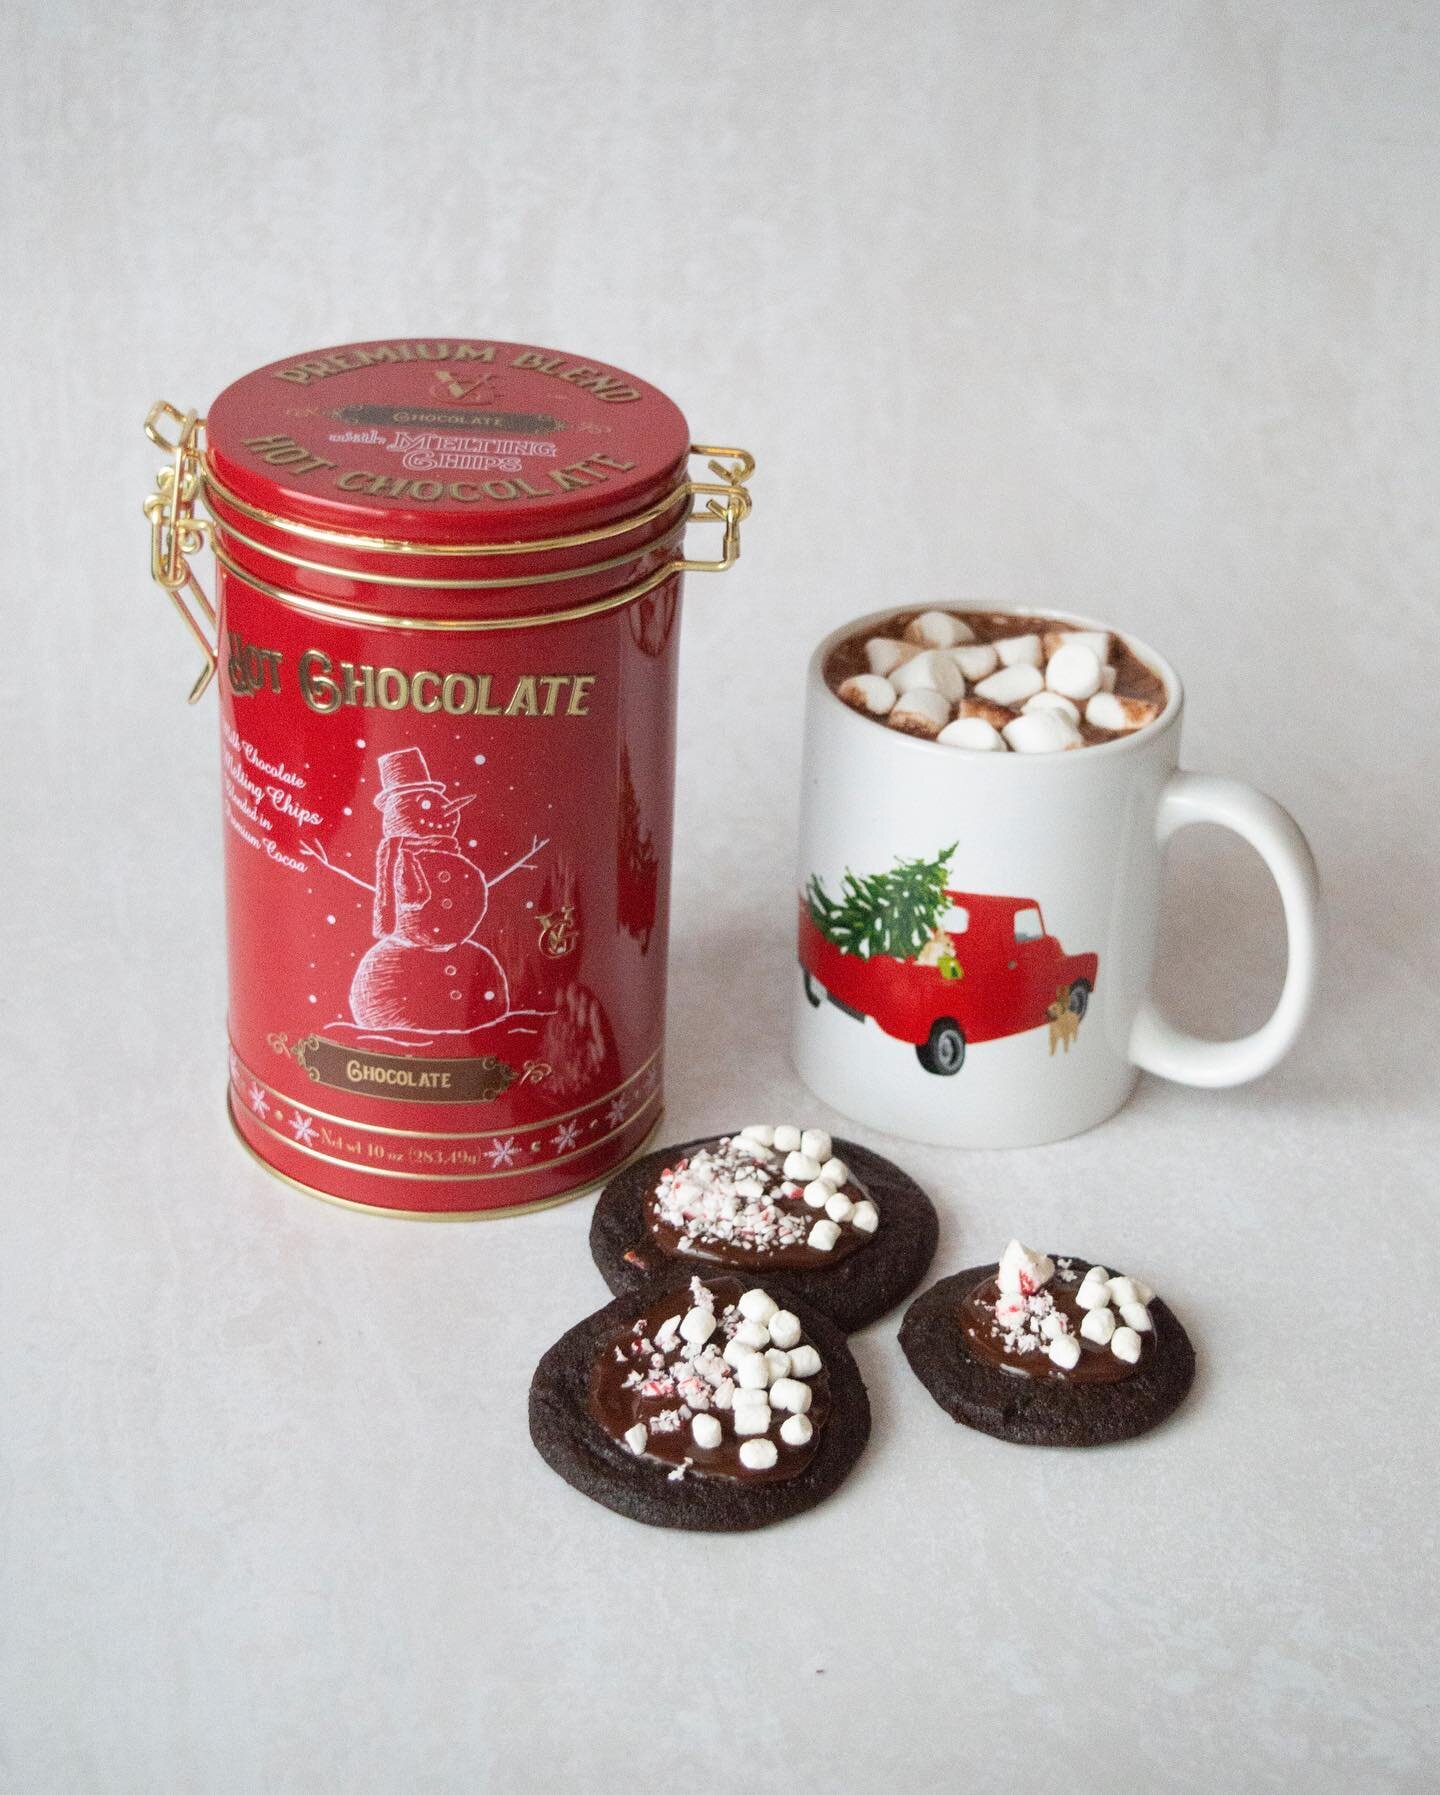 Hot Cocoa Cookies!? Yes, please! Follow any double chocolate cookie recipe and add melted chocolate chips, crushed peppermint, and marshmallows. You can find our Van Guilder Tins at Menards to try this recipe with our premium hot chocolate 🍫 ☕️ 

@m